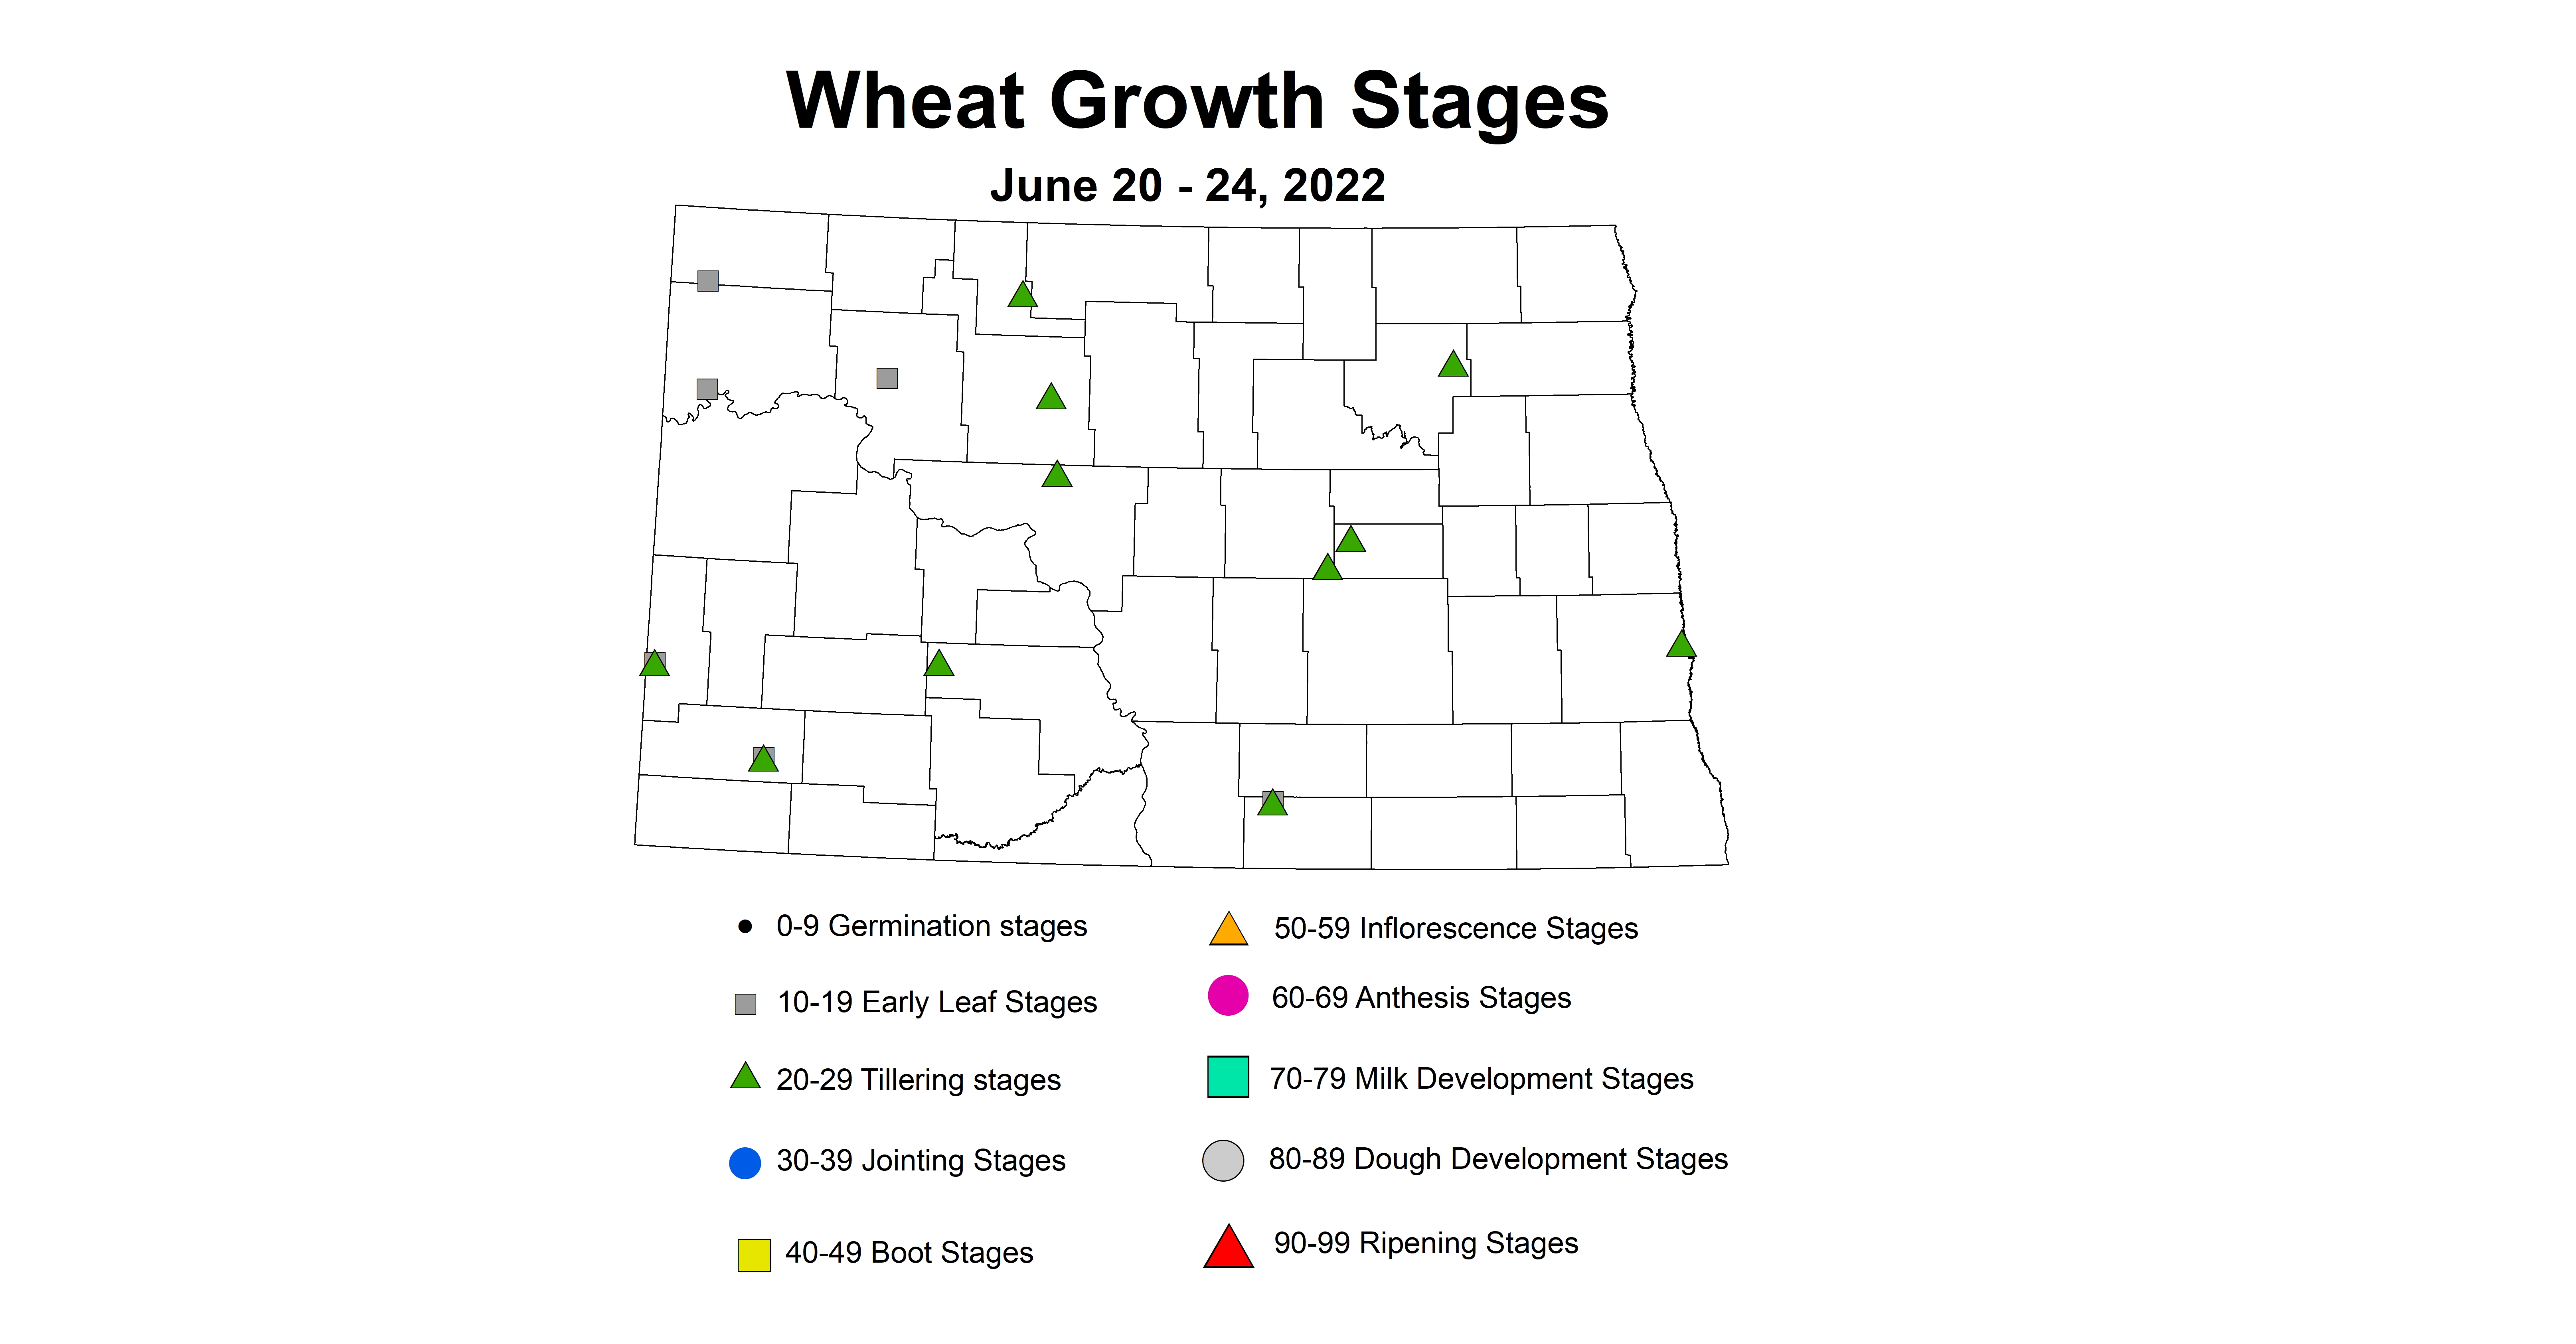 ND IPM map of wheat growth stages June 20-24, 2022